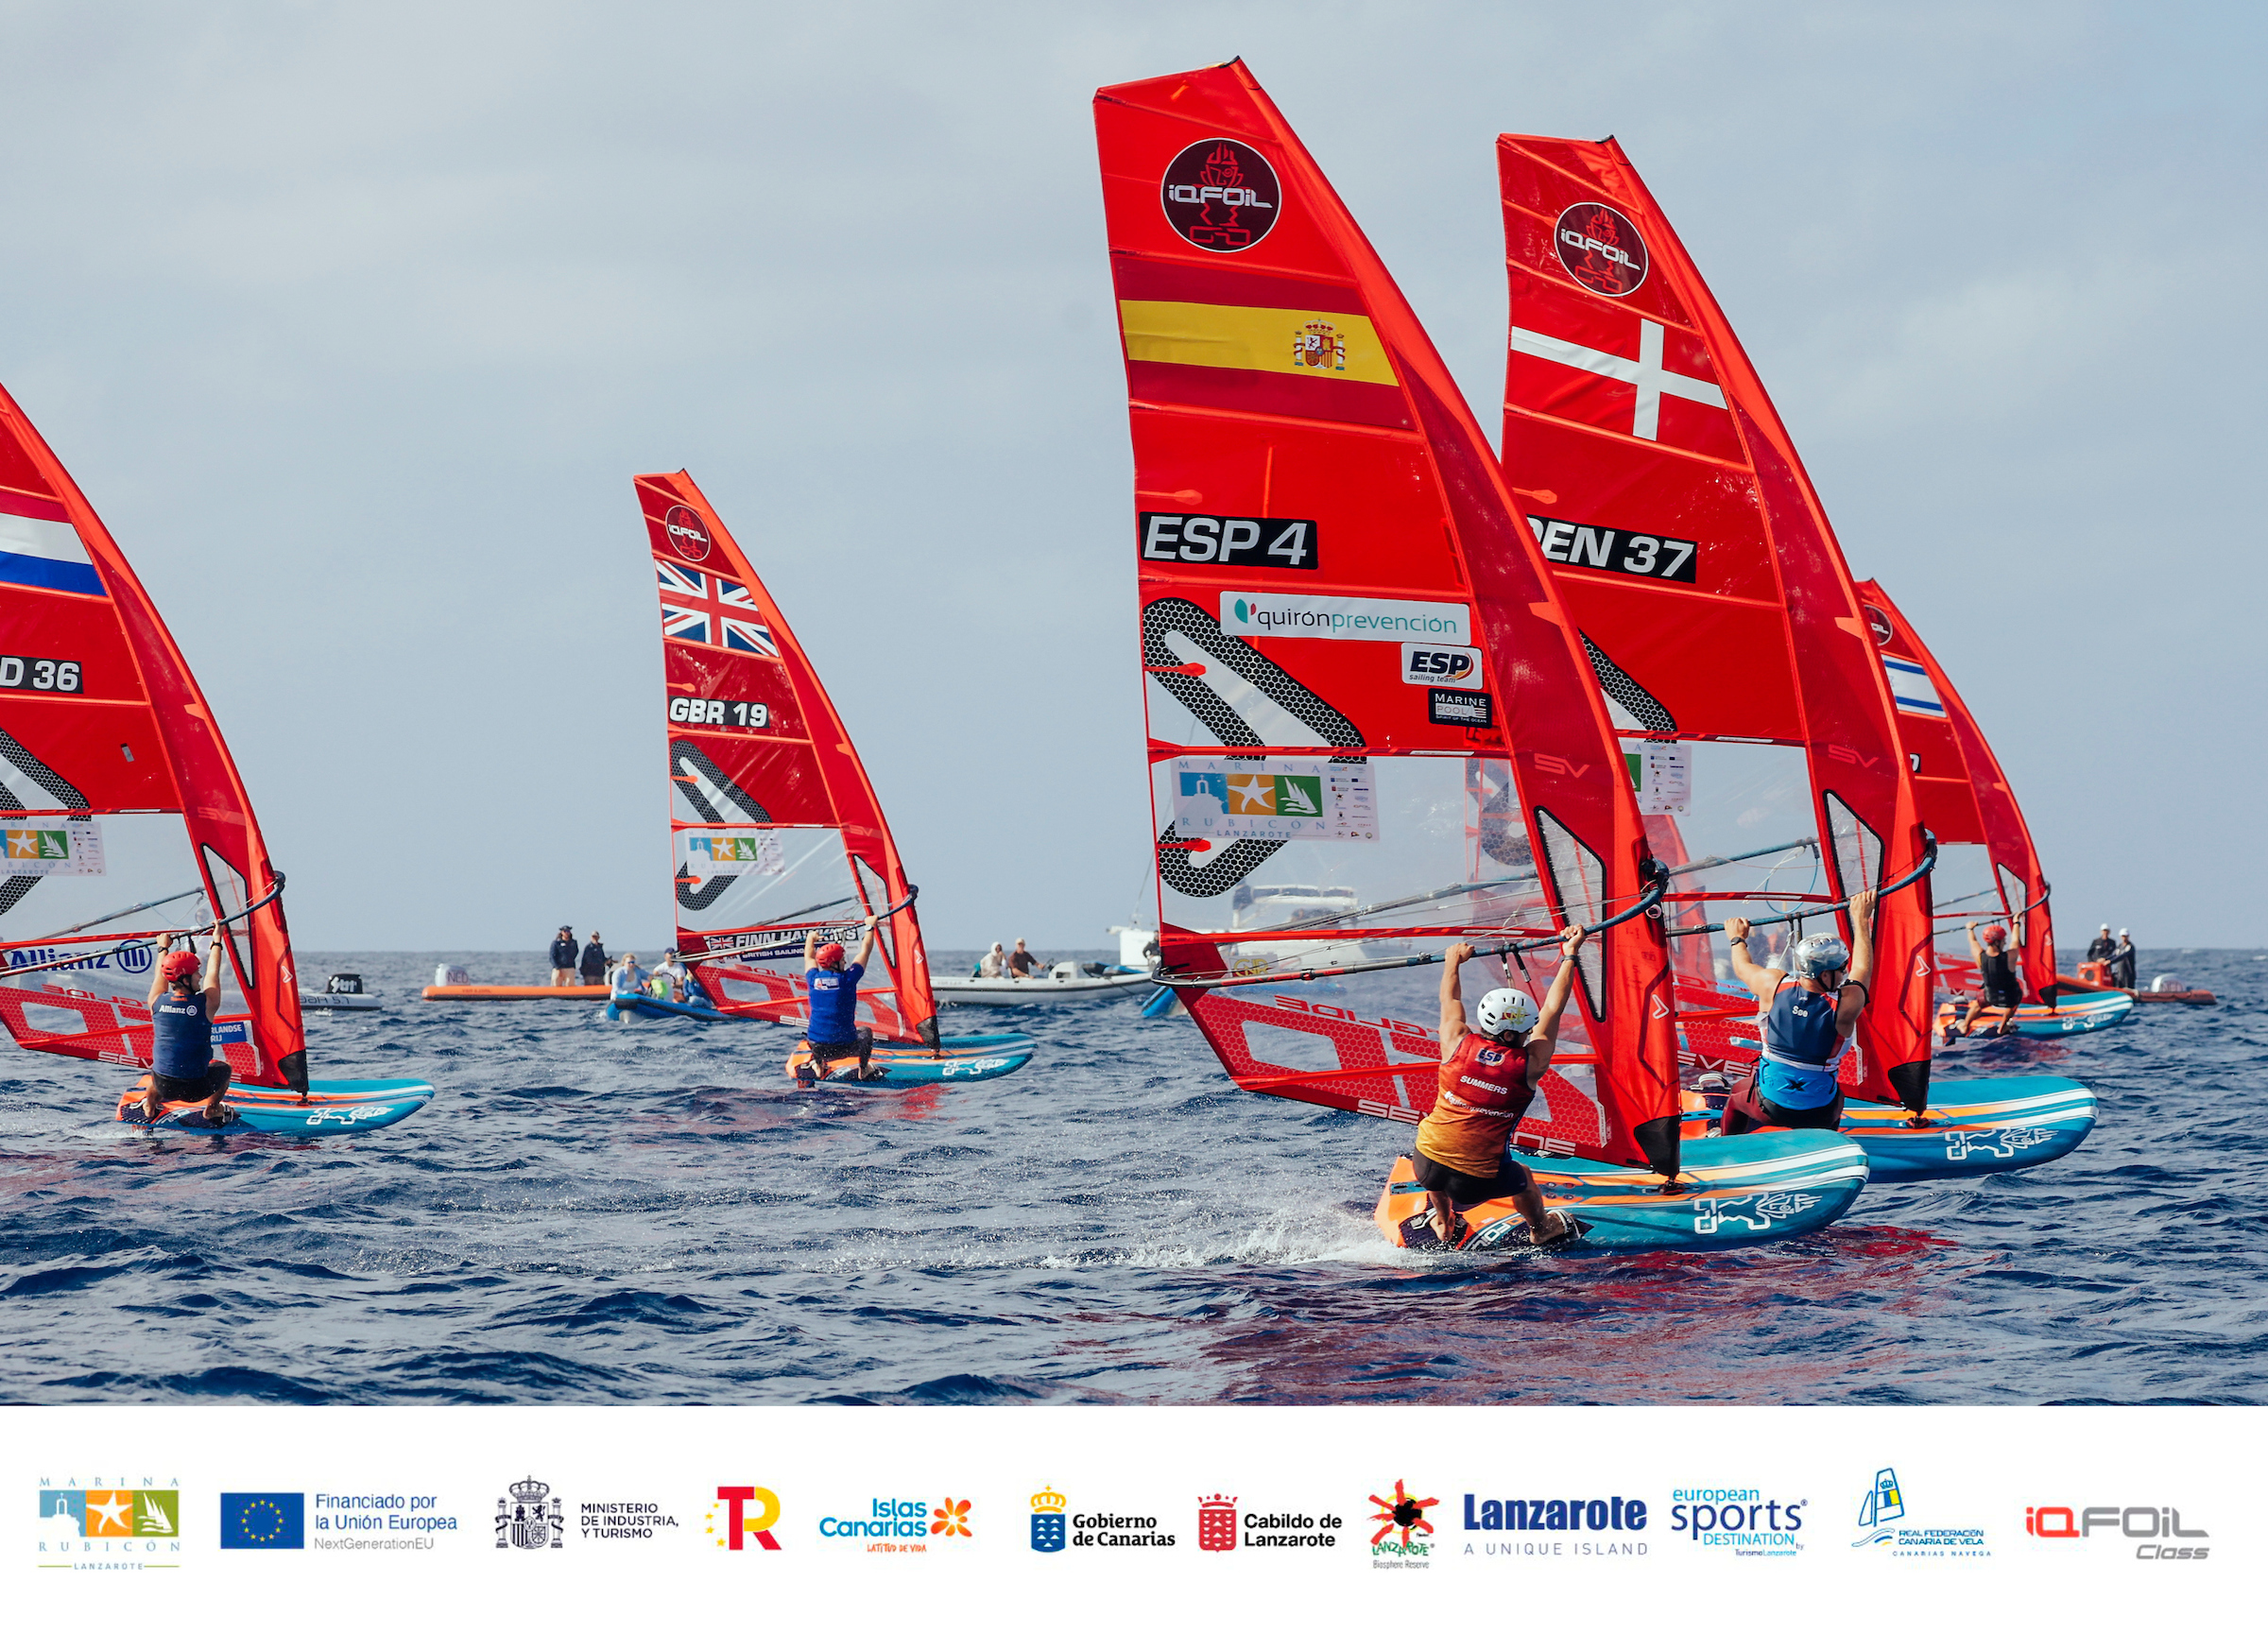 2023 iQFOiL  Games # 7 Lanzarote
© Sailing Energy / iQfoil Class
15 December, 2023